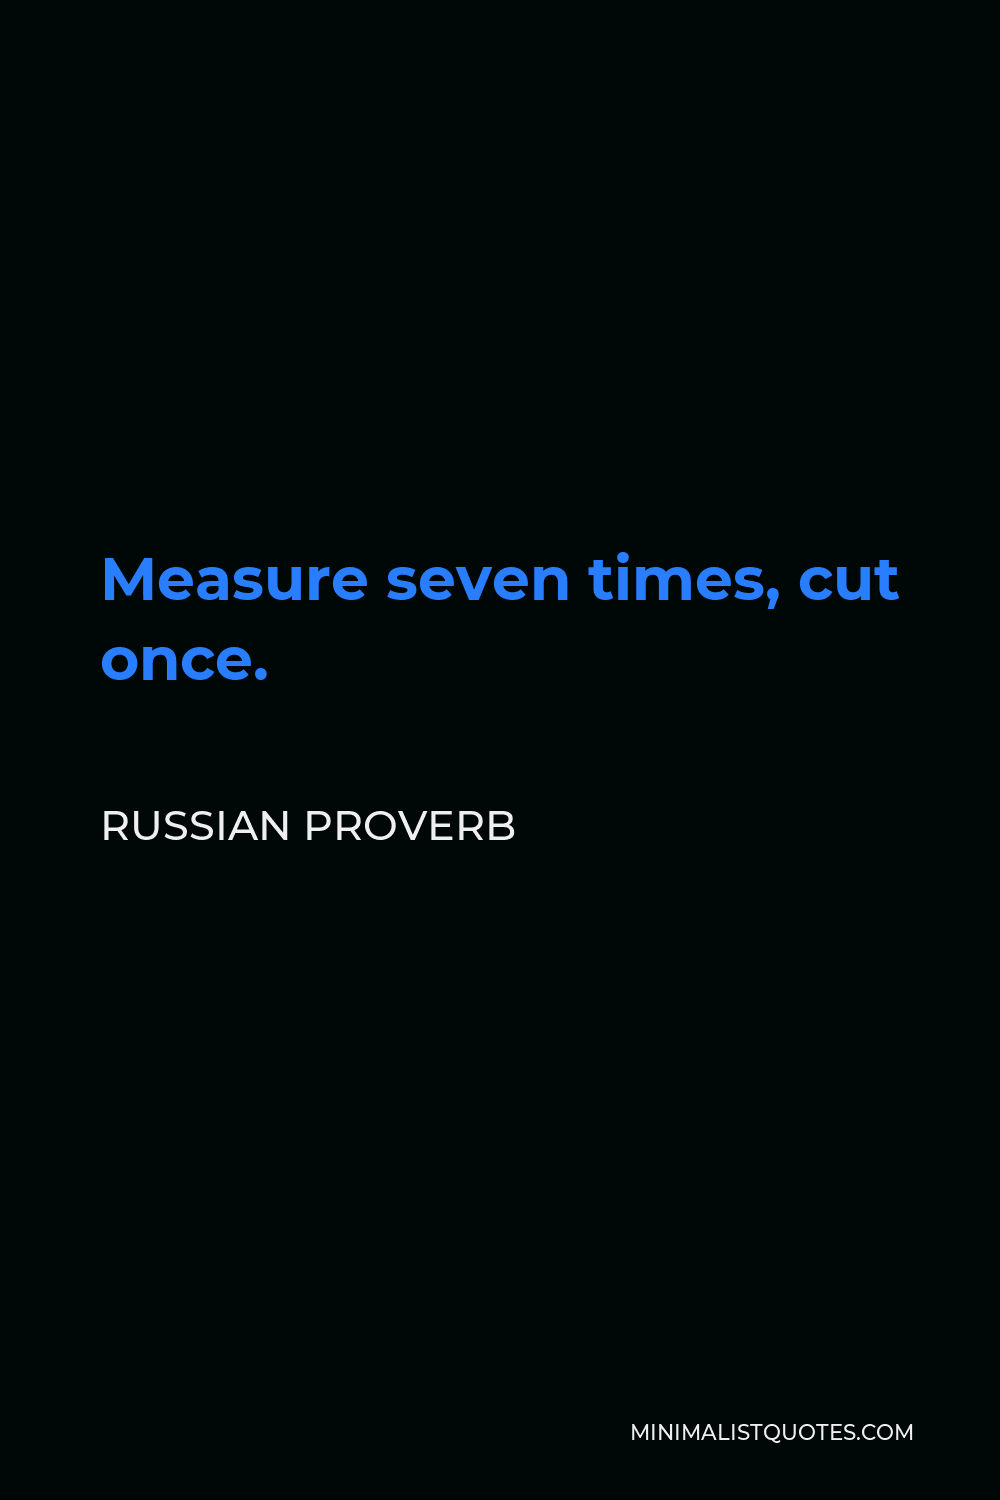 Russian Proverb Quote - Measure seven times, cut once.